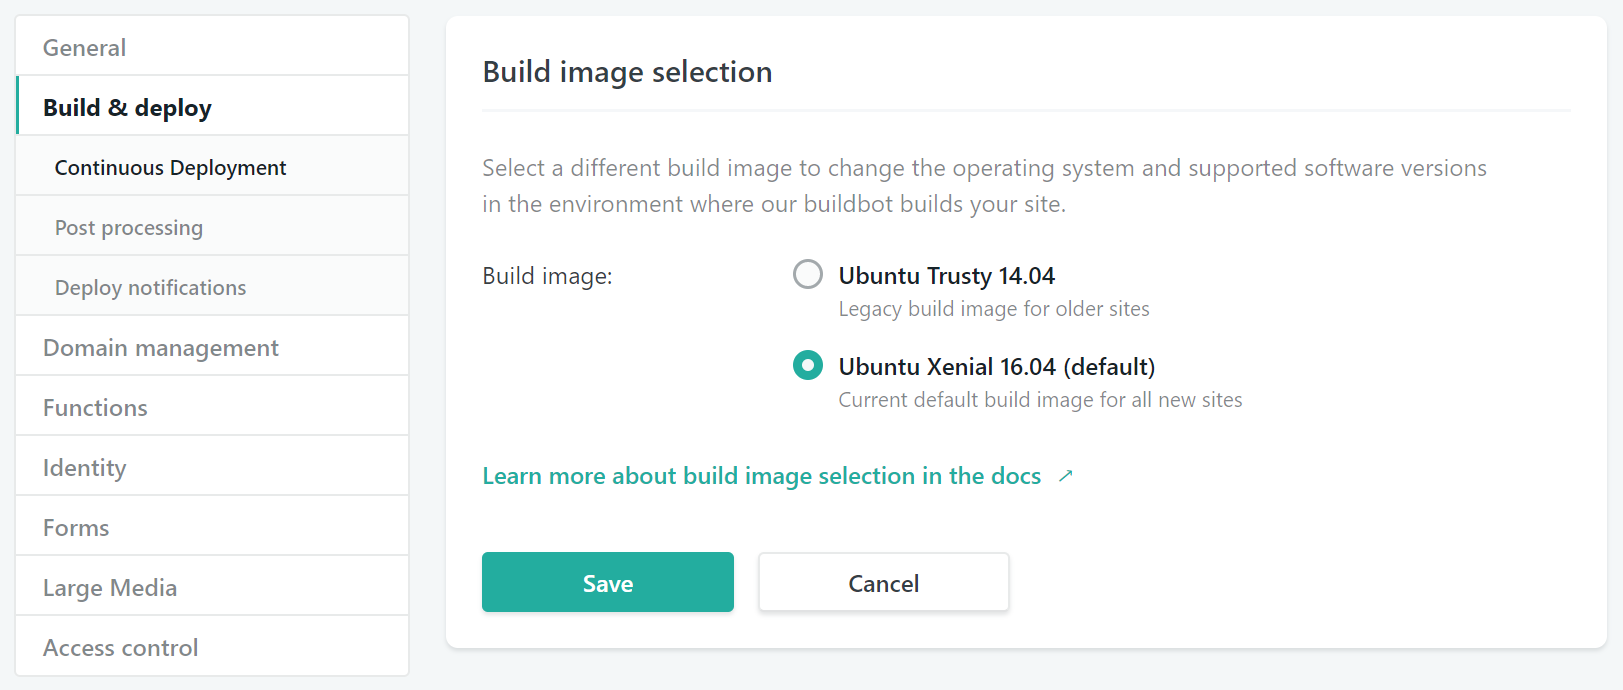 Build image selection settings UI at Settings > Build & deploy > Continuous deployment